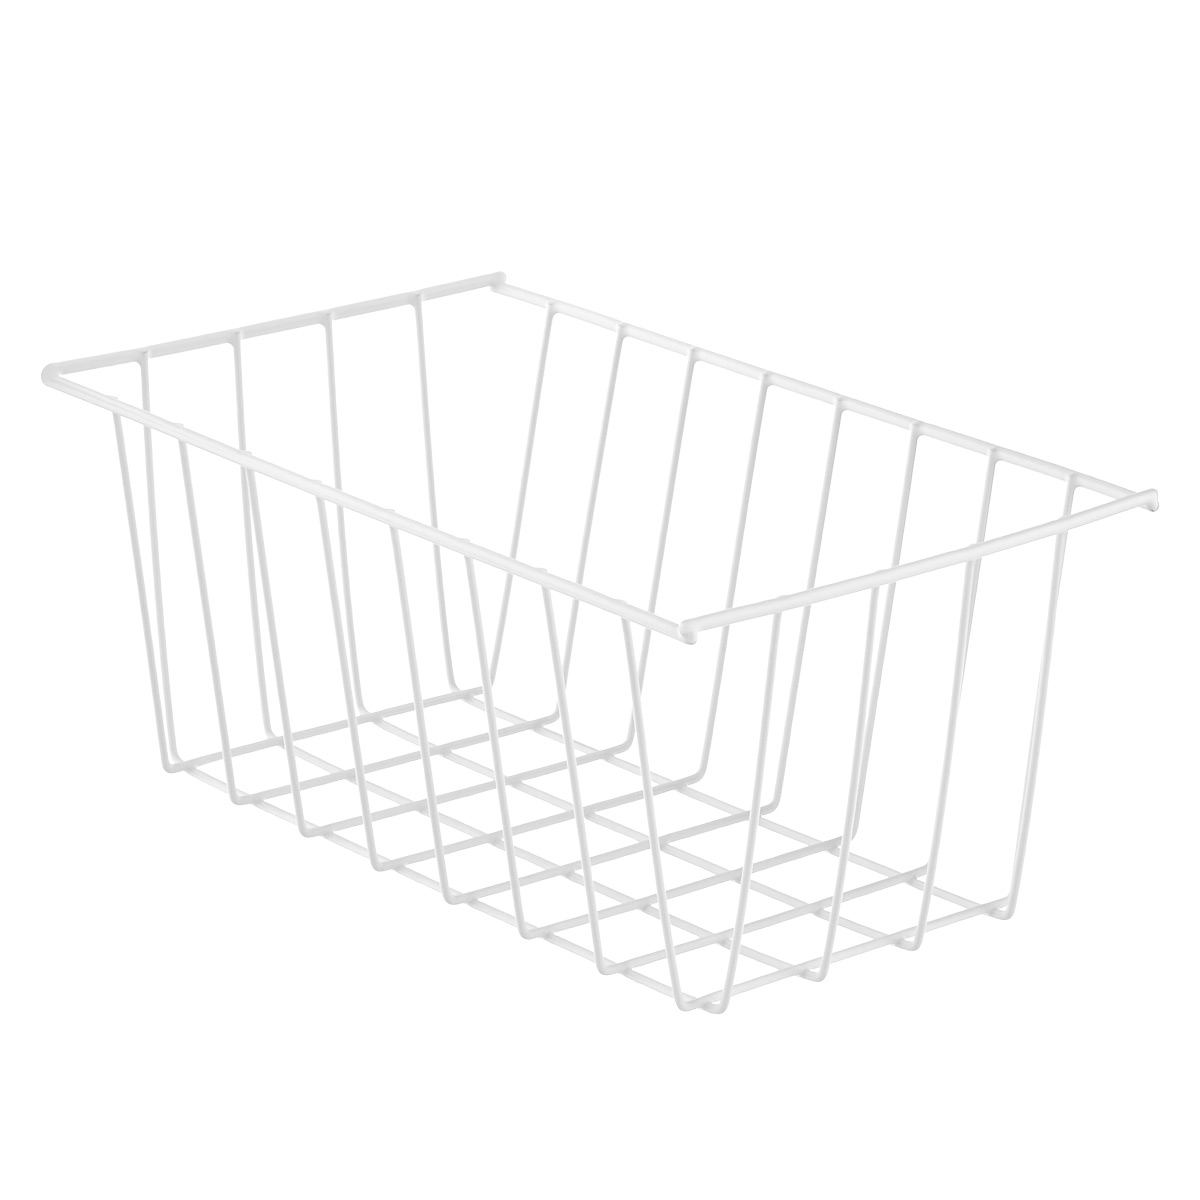 https://www.containerstore.com/catalogimages/417491/10074115_shallow_freezer_basket_whit.jpg